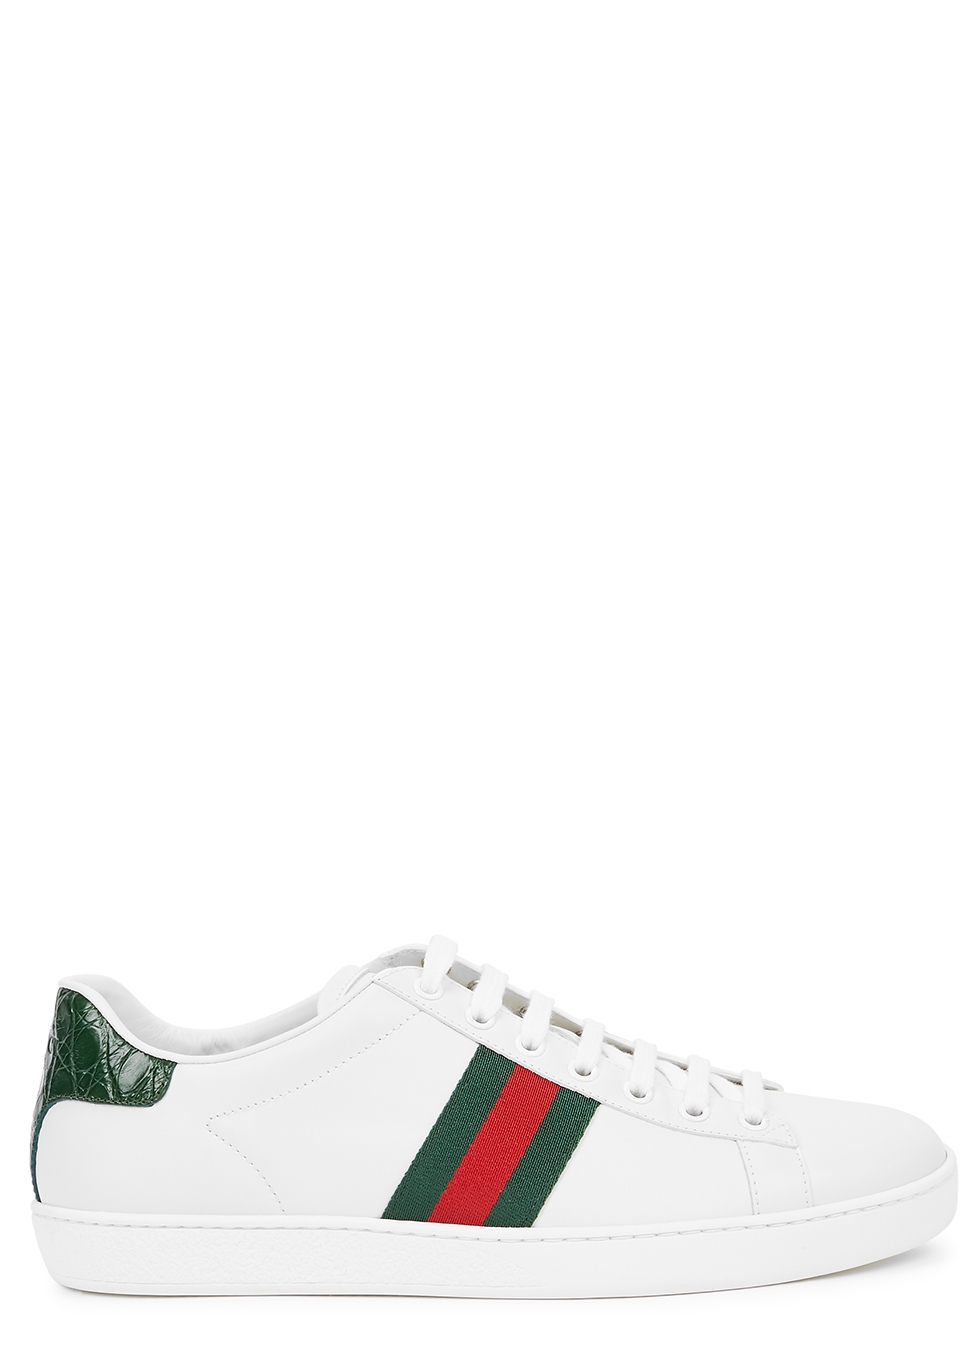 Gucci Women's Low-Top Trainers - Harvey 